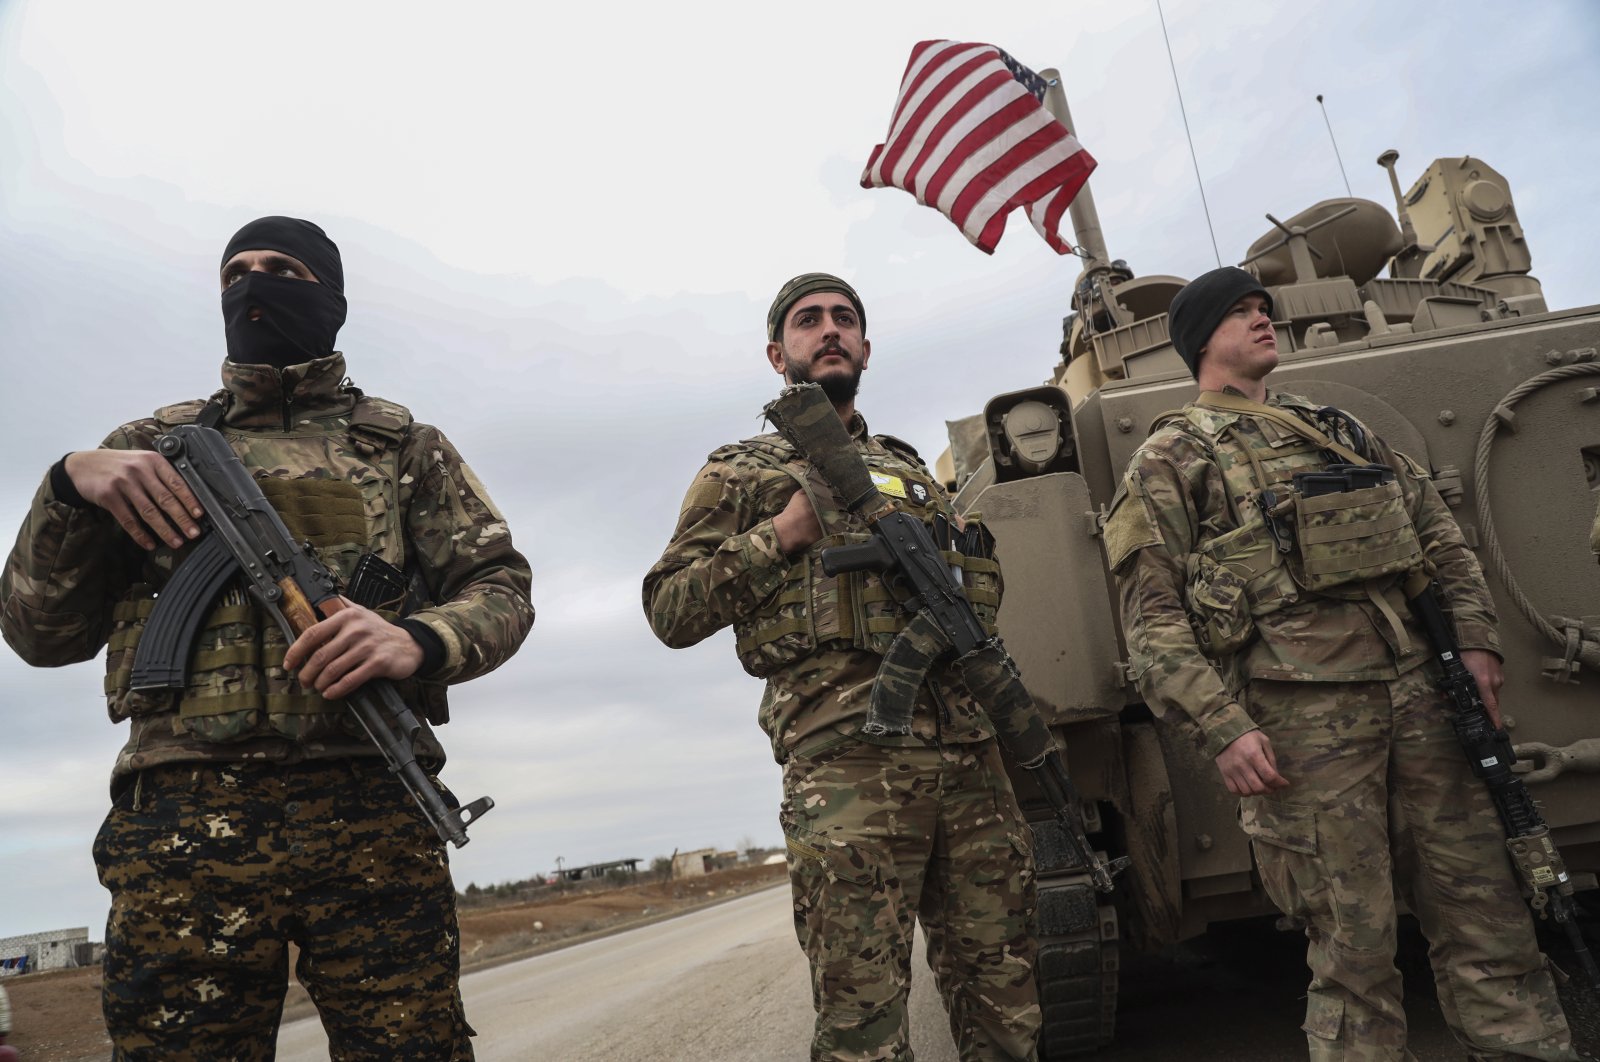 YPG terrorists and U.S. soldiers stand next to each other in Hassakeh, Syria, Feb. 8, 2022. (AP Photo)